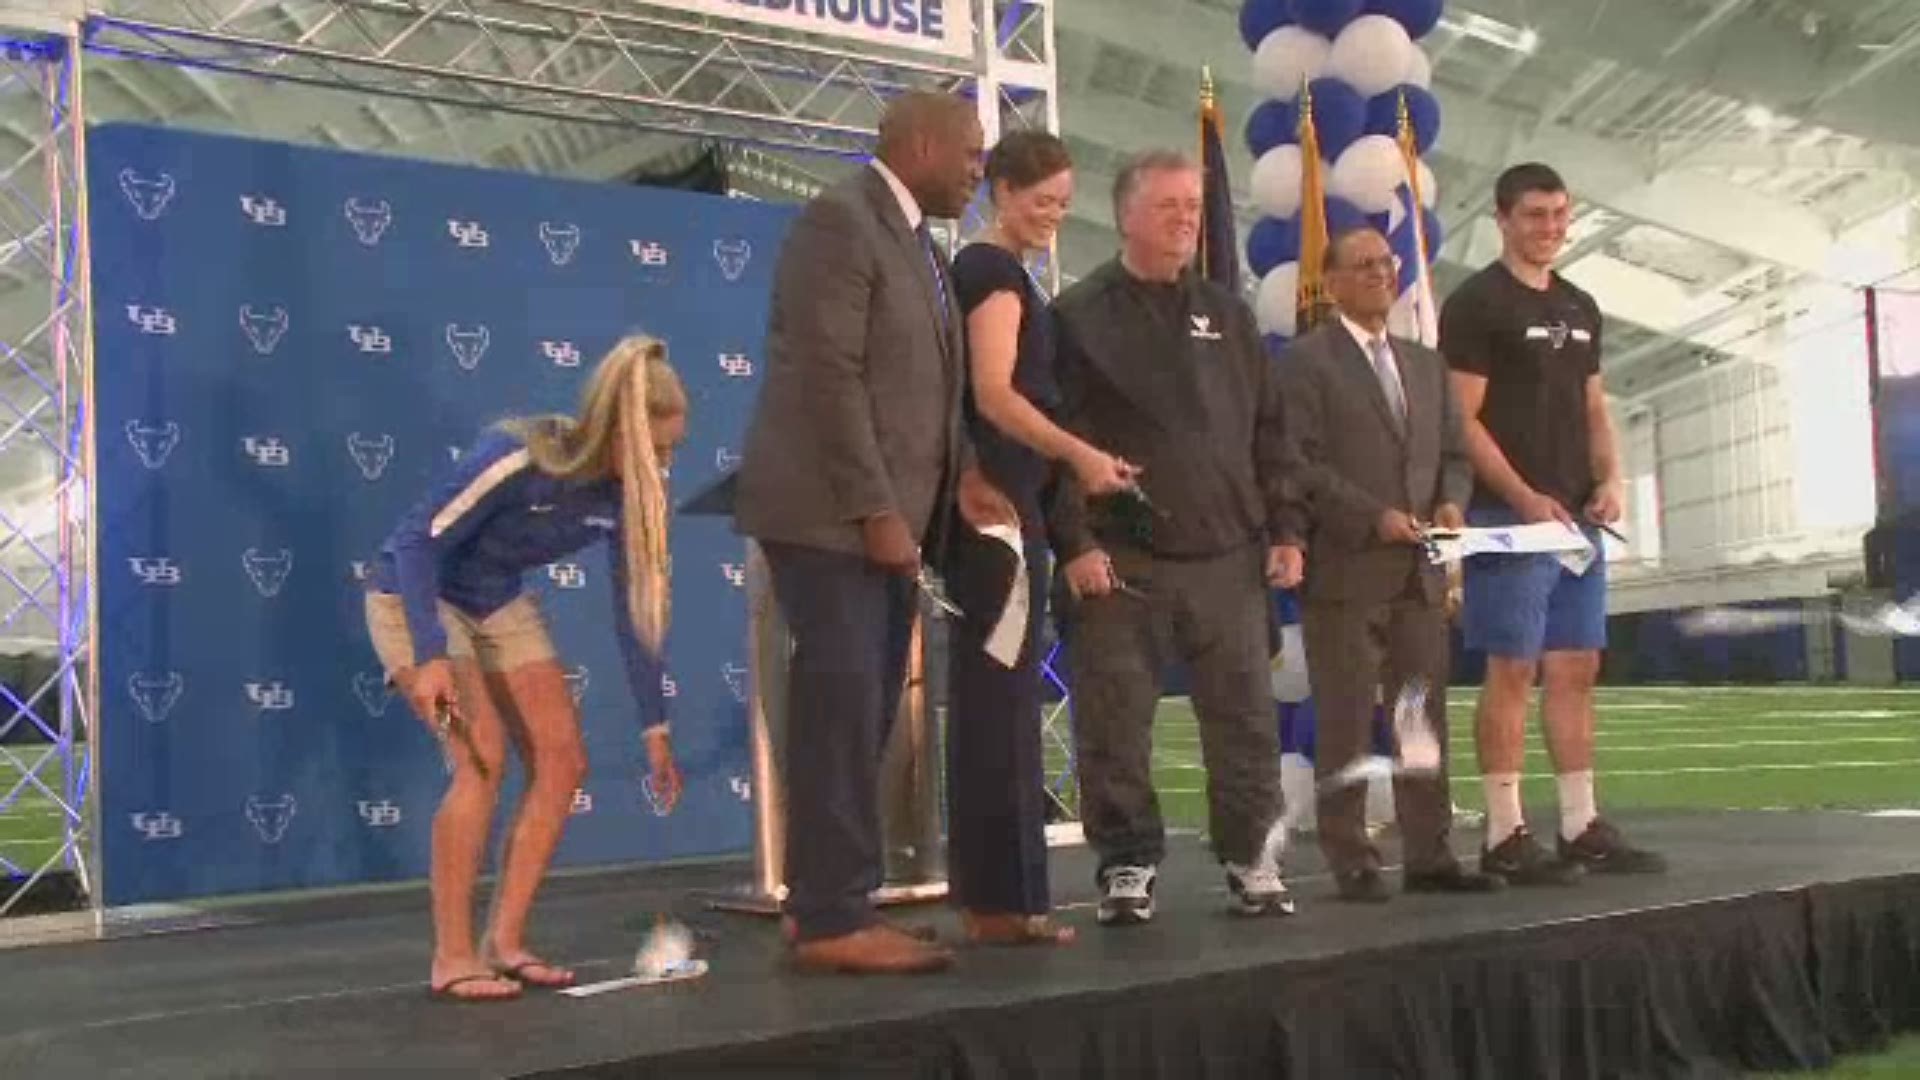 Its a day of celebration at the University at Buffalo. The Murchie Family Fieldhouse has its grand opening.